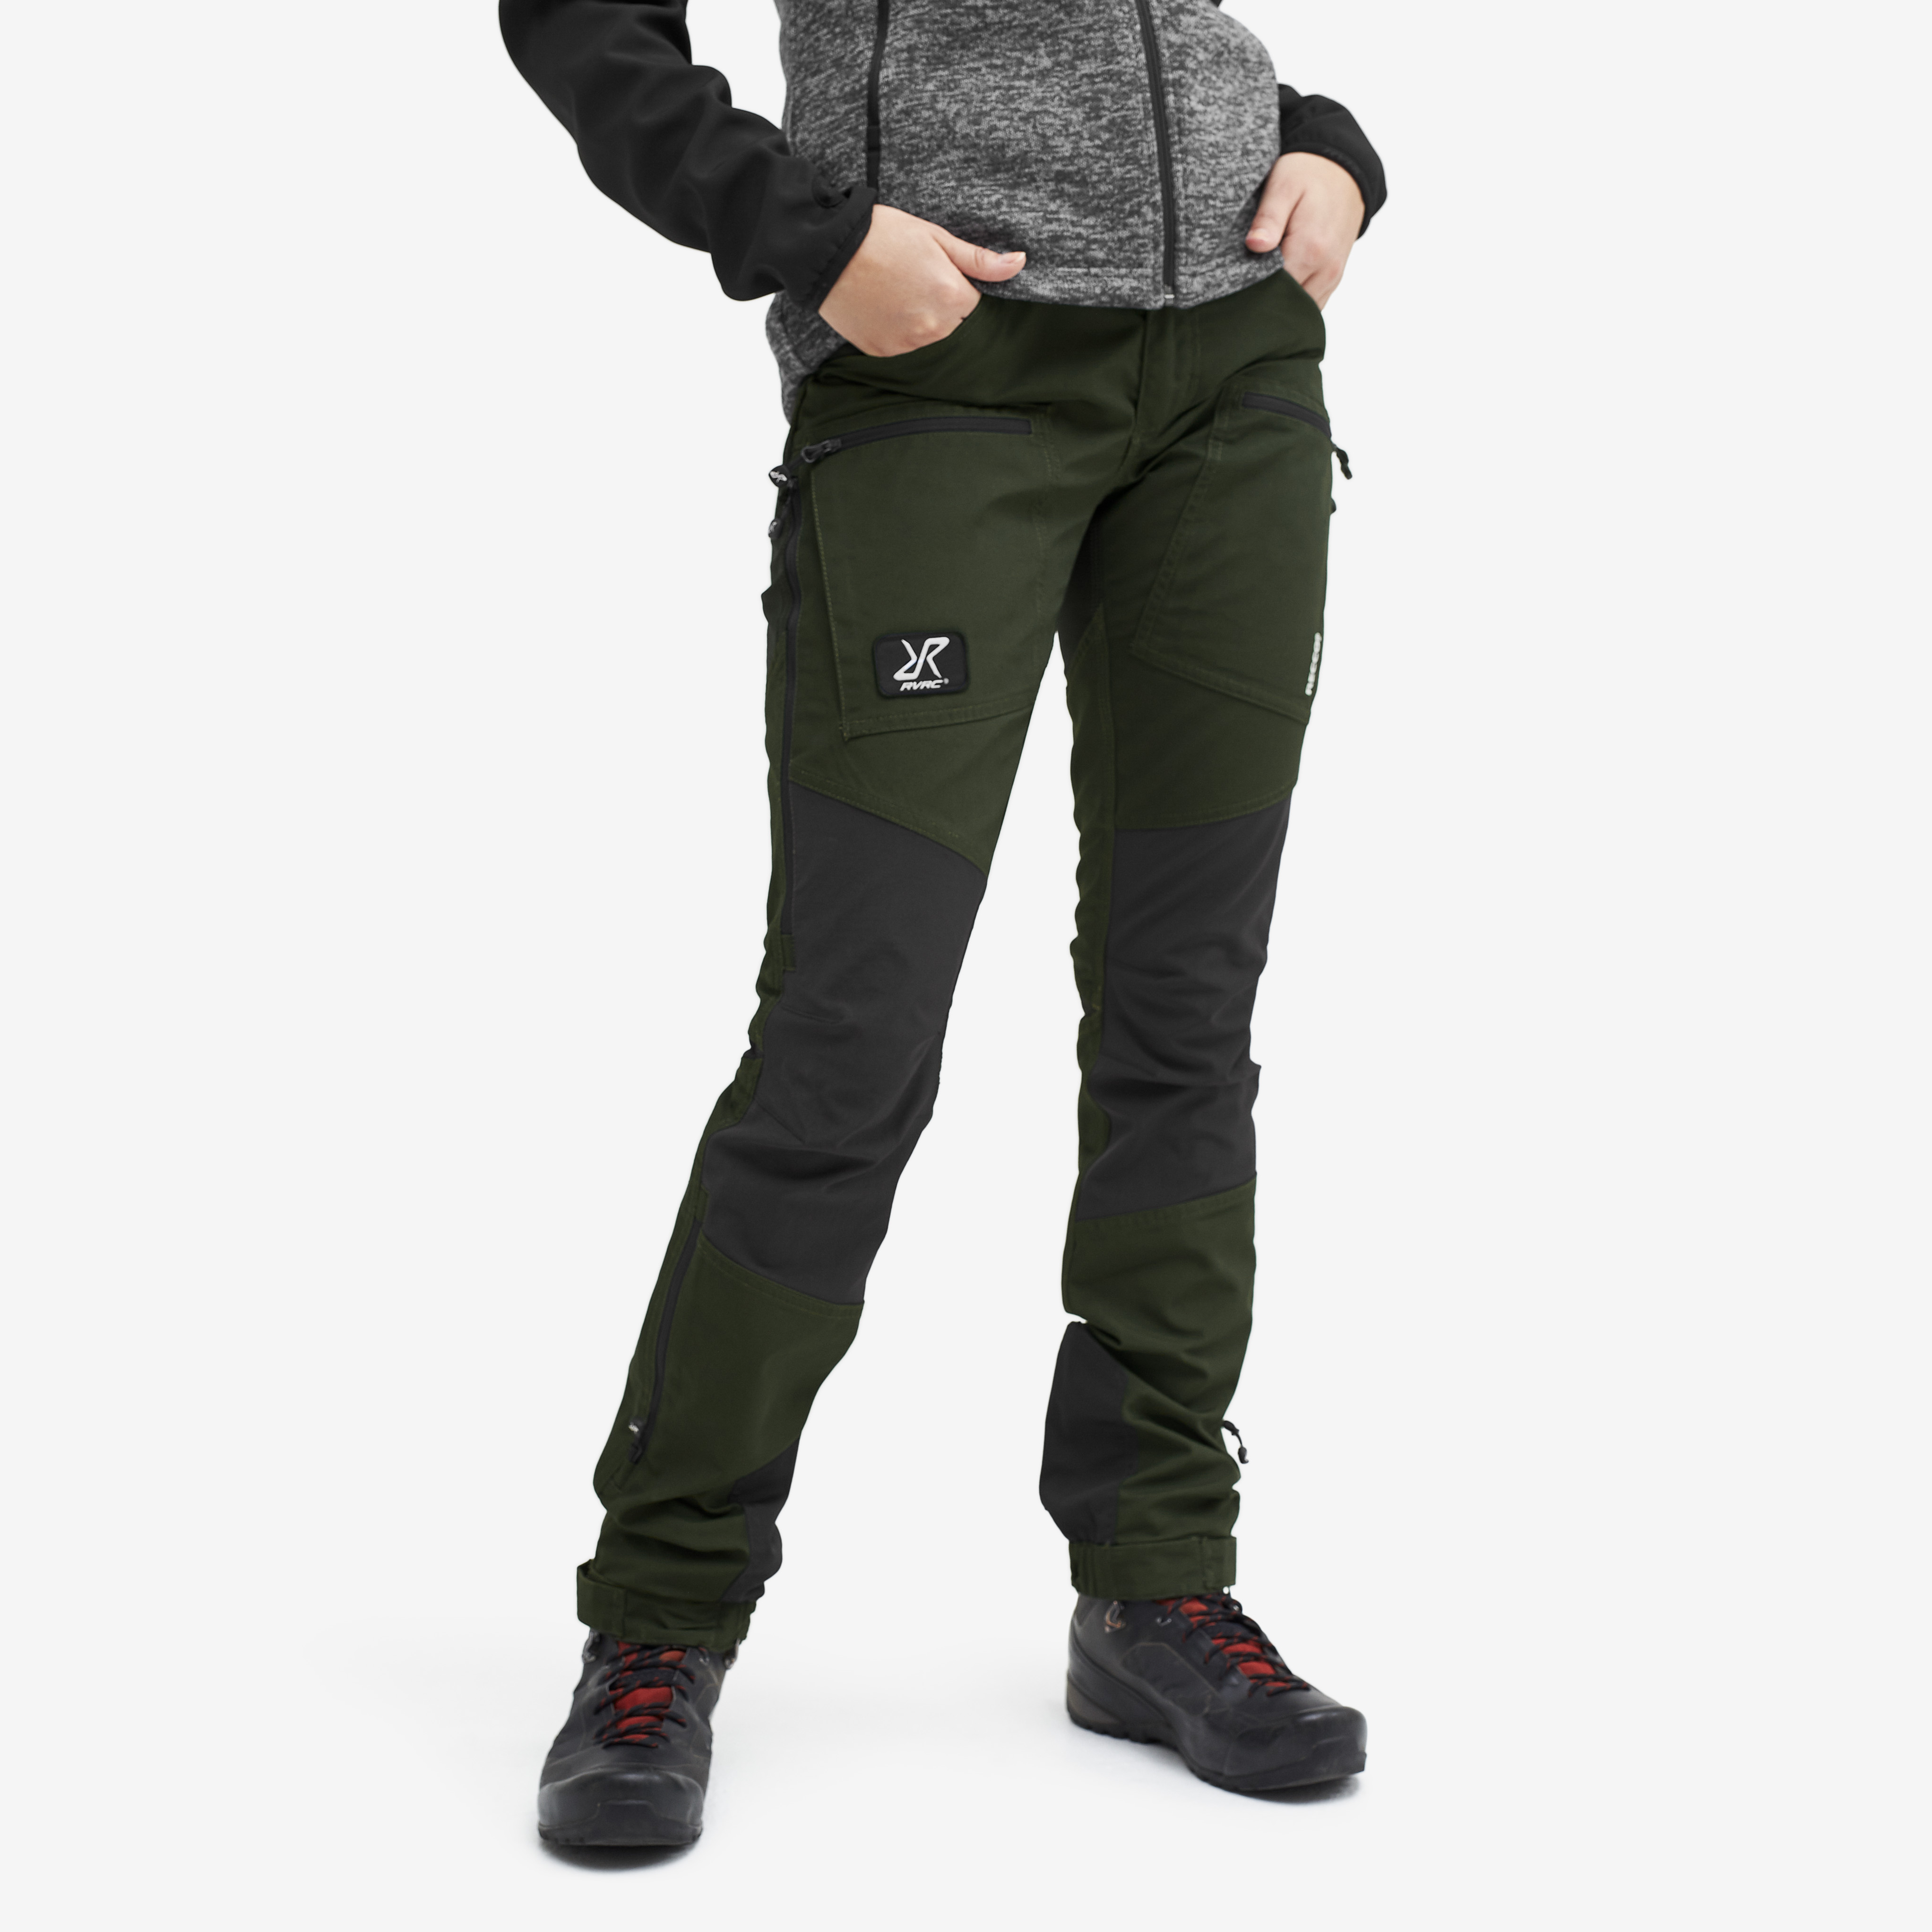 Nordwand Pro Rescue hiking trousers for women in green